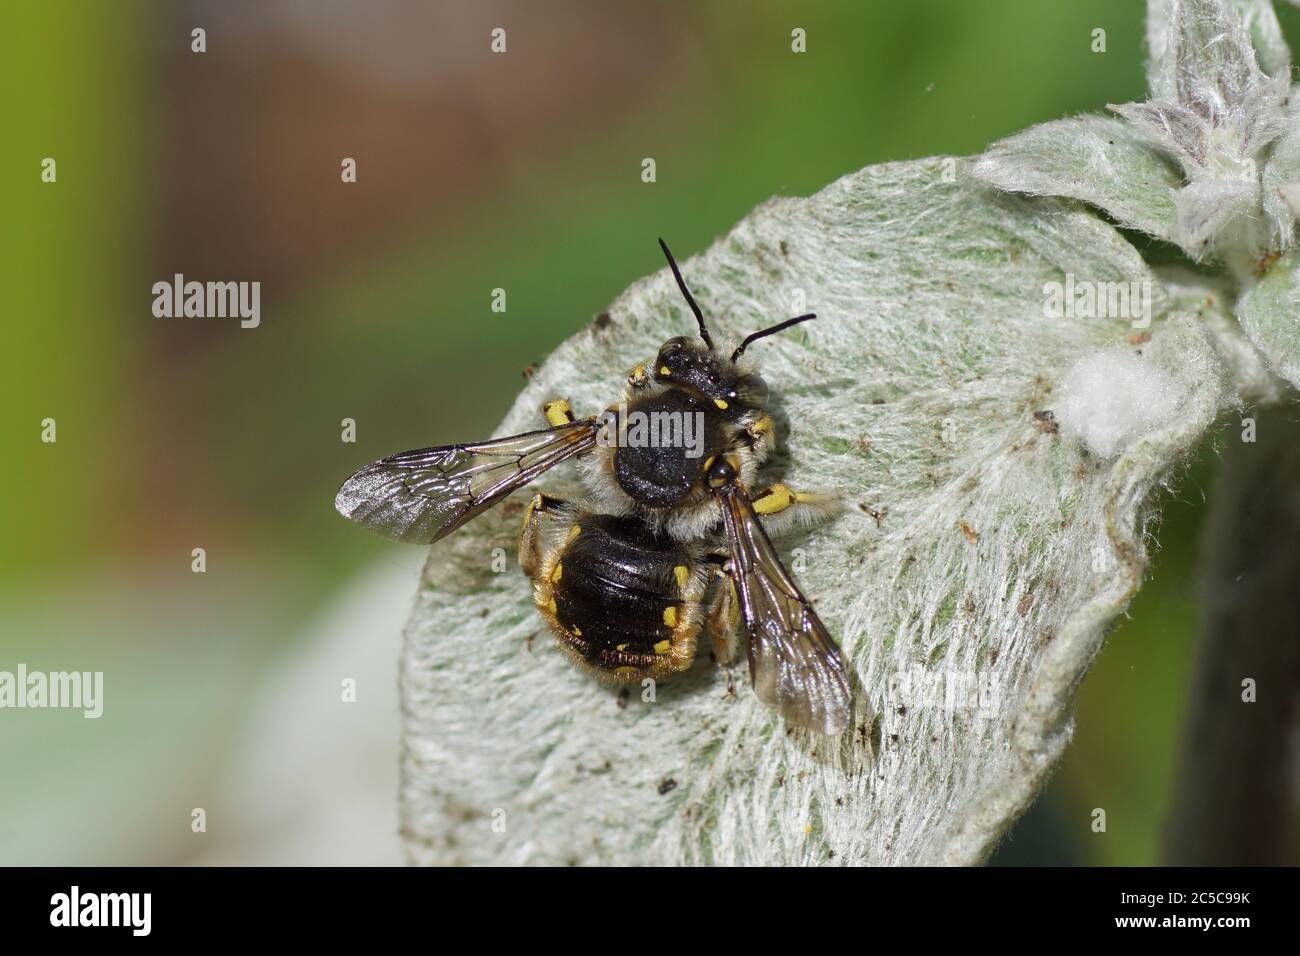 European wool carder bee (Anthidium manicatum) family Megachilidae, leaf-cutter bees on a leaf of a lamb's-ear (Stachys byzantina), family Lamiaceae Stock Photo